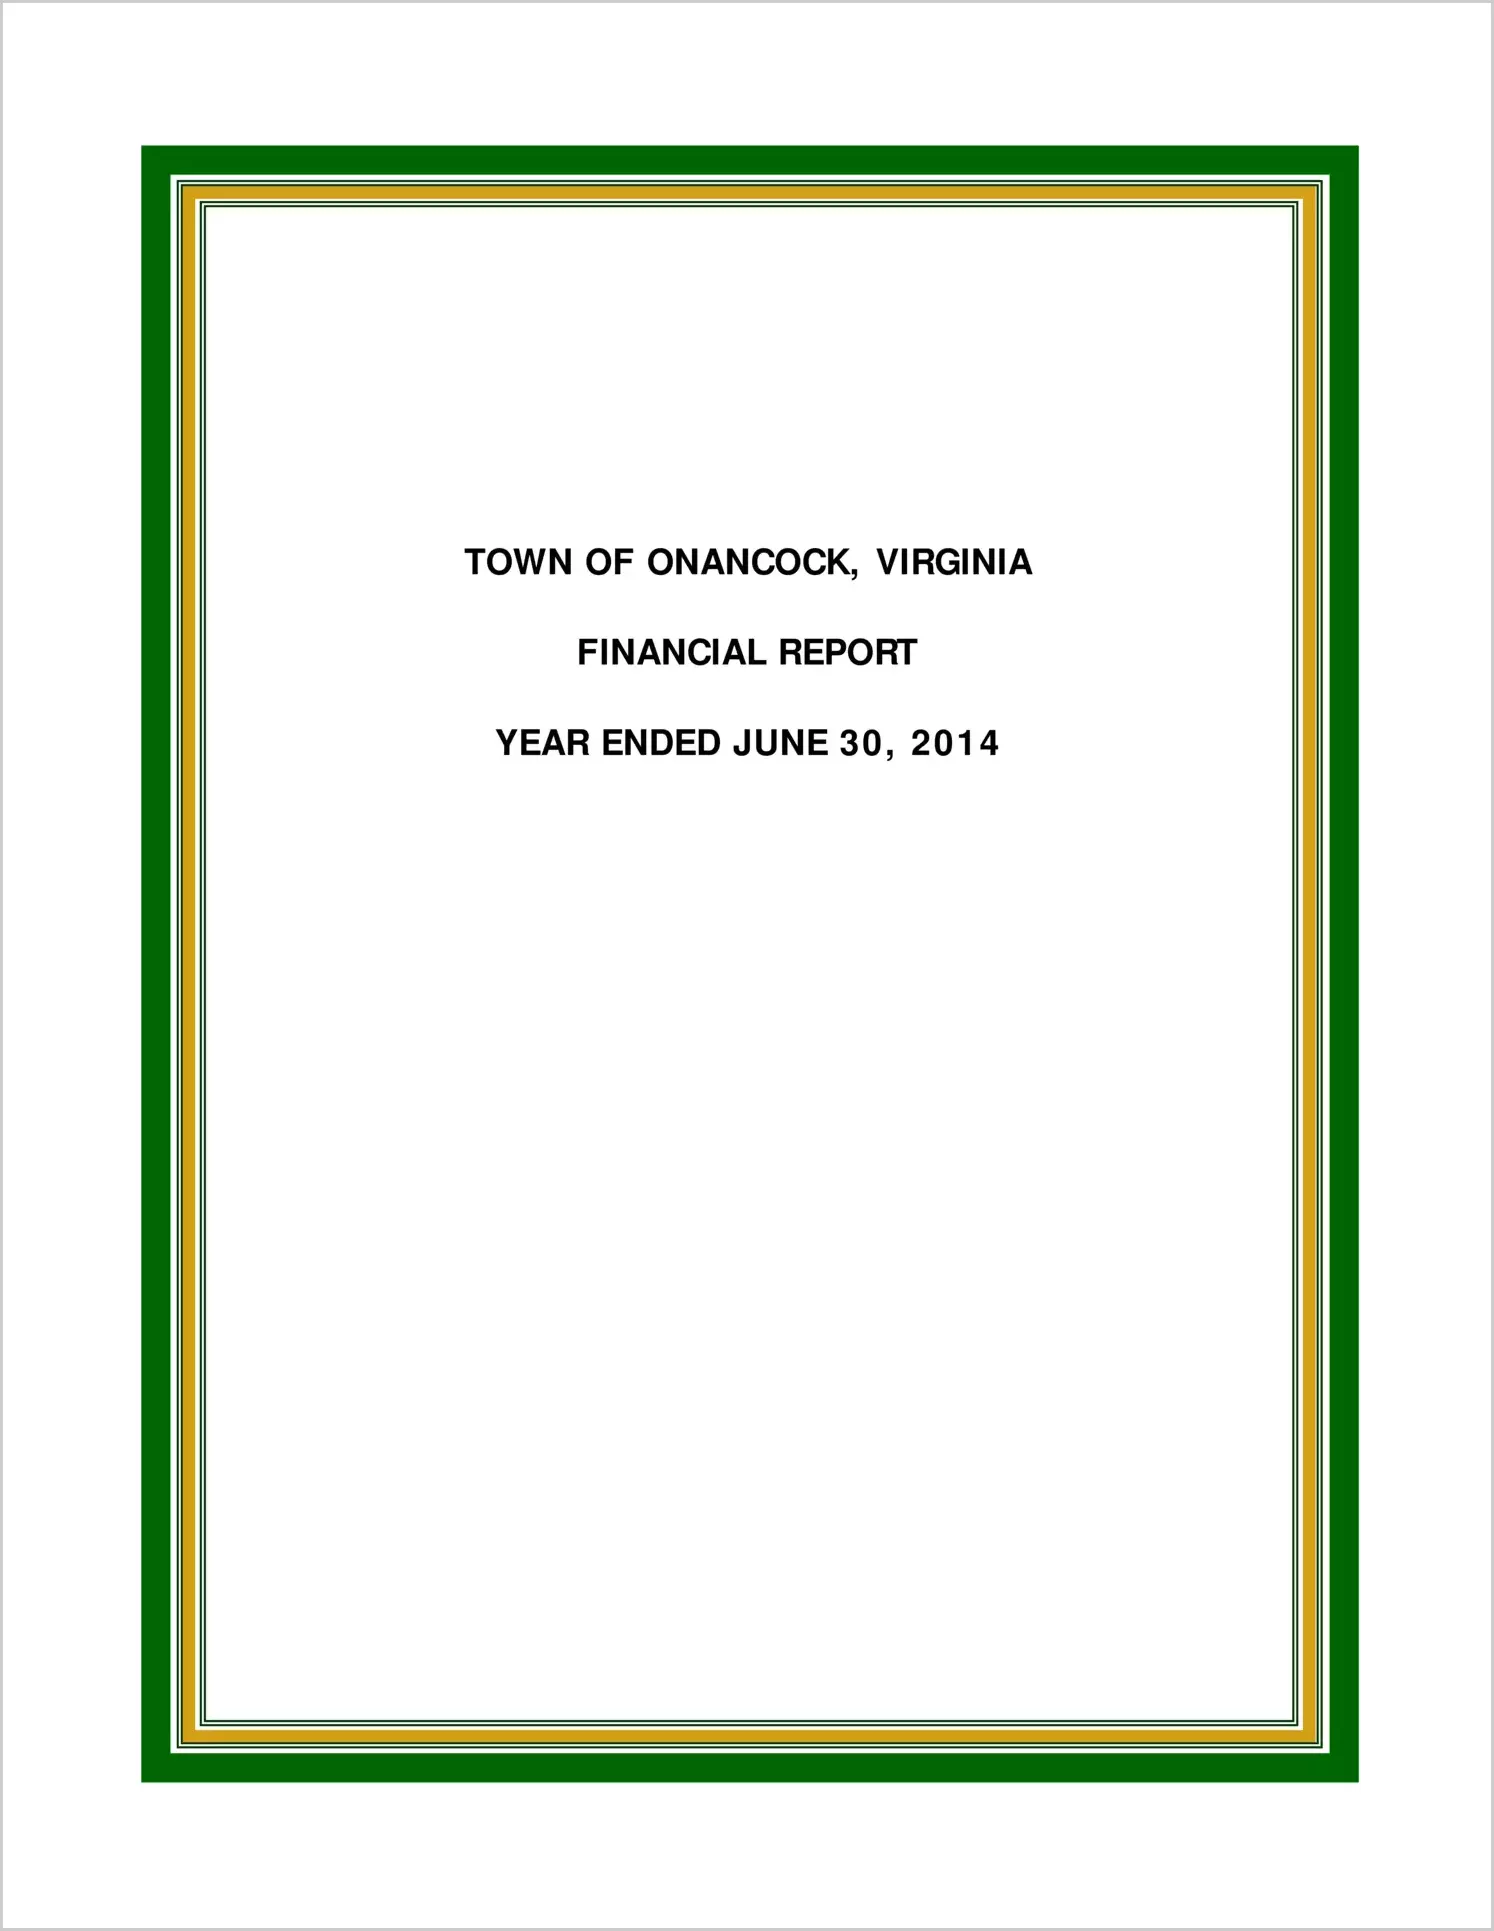 2014 Annual Financial Report for Town of Onancock